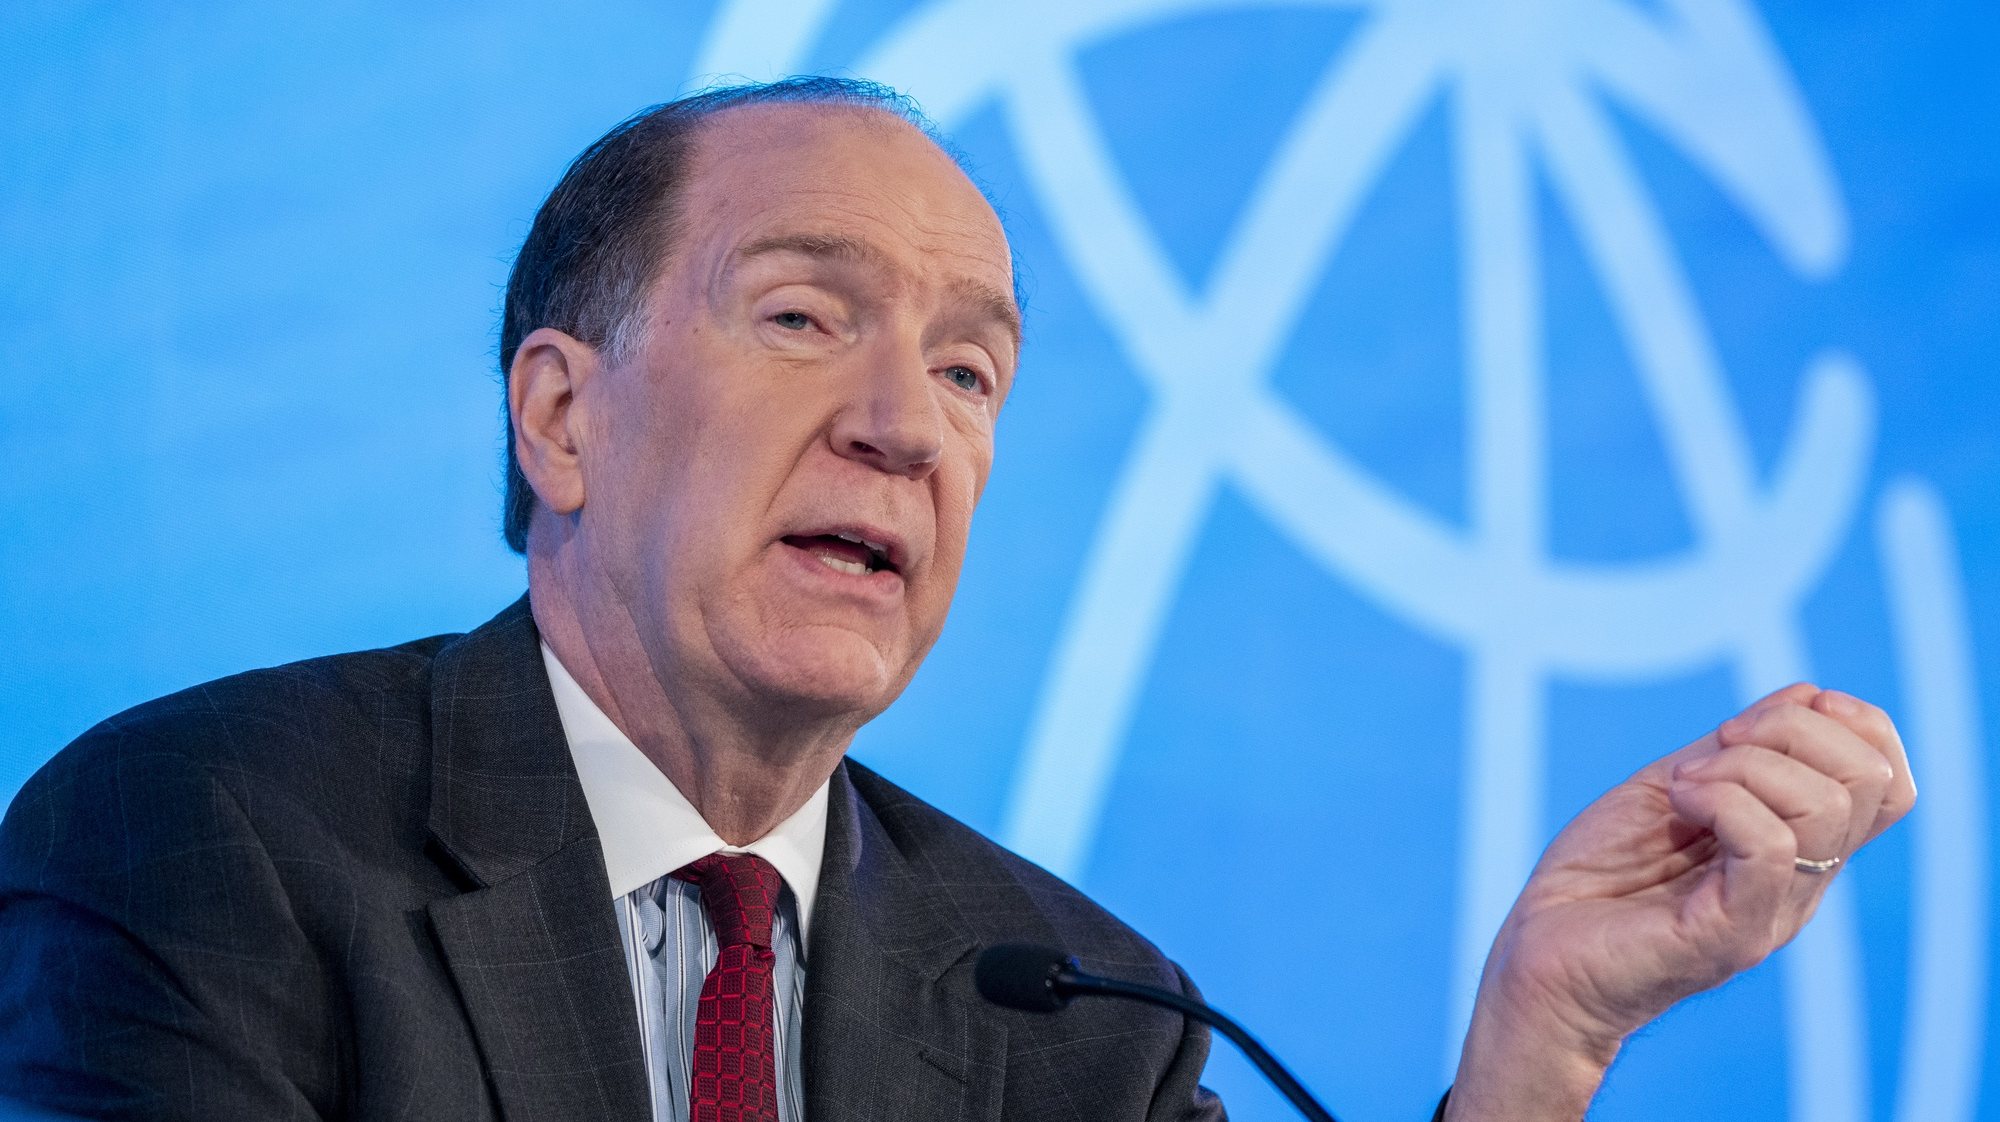 epa10240846 President of the World Bank Group David Malpass responds to a question from the news media during his opening press conference at the 2022 Annual Meetings of the IMF and the World Bank Group (WBG) in Washington, DC, USA, 13 October 2022. The meetings run from 10 October to 16 October.  EPA/SHAWN THEW